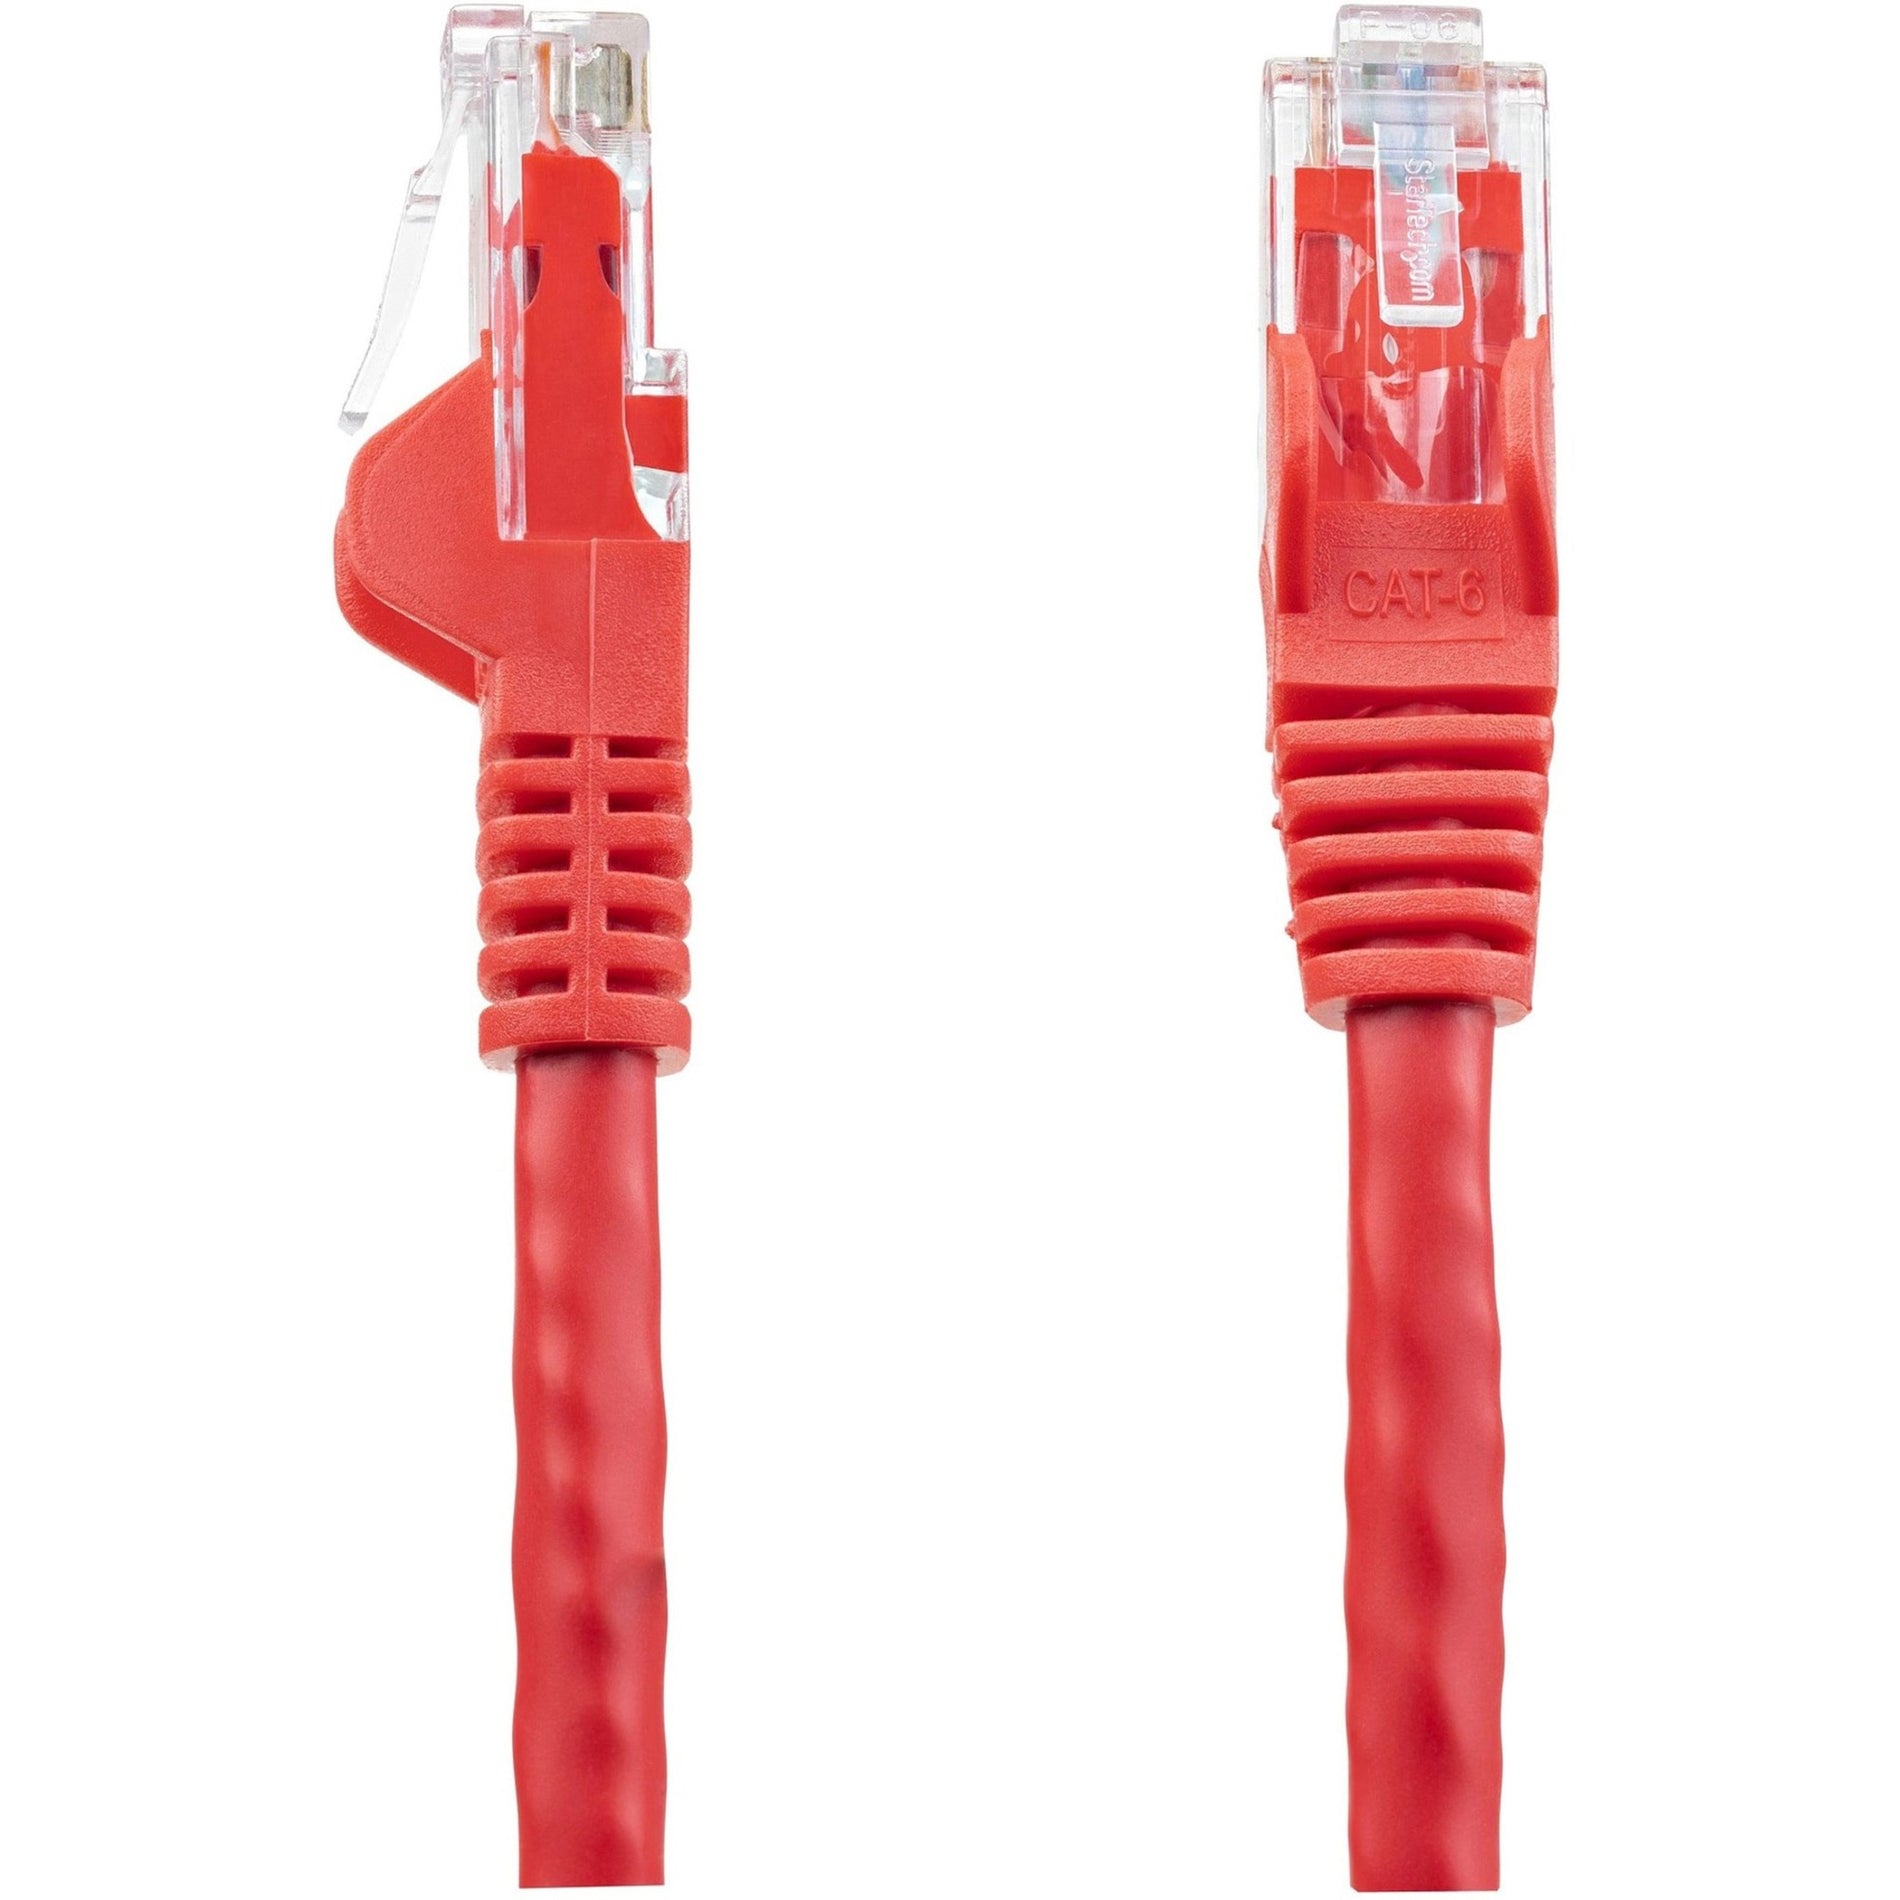 StarTech.com N6PATCH20RD Cat. 6 Network Cable, 20ft Red Ethernet Cable, Snagless RJ45 Connectors